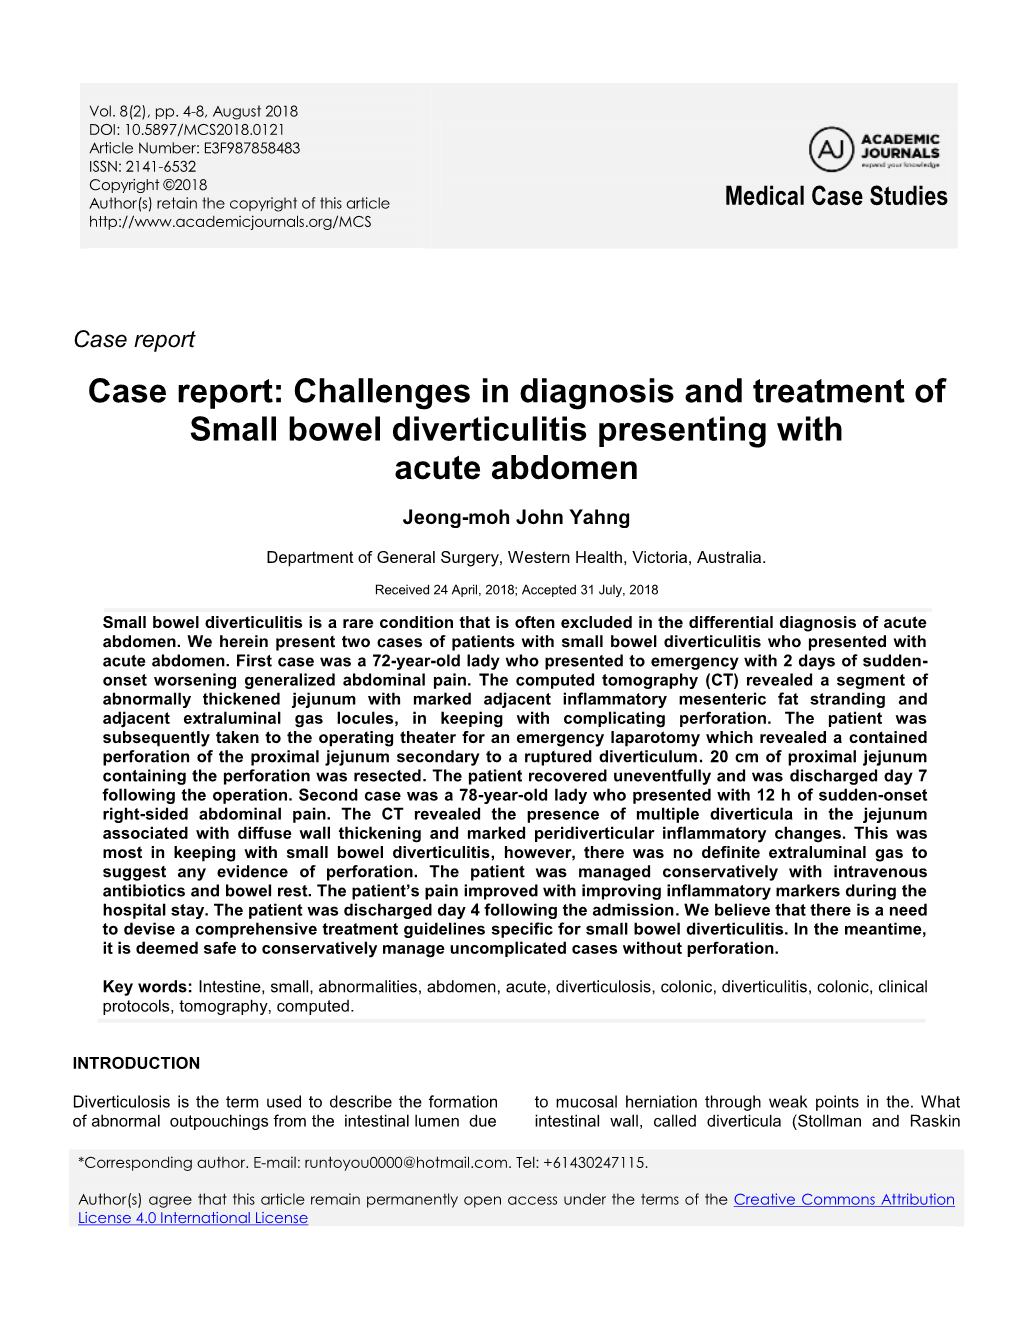 Case Report: Challenges in Diagnosis and Treatment of Small Bowel Diverticulitis Presenting with Acute Abdomen